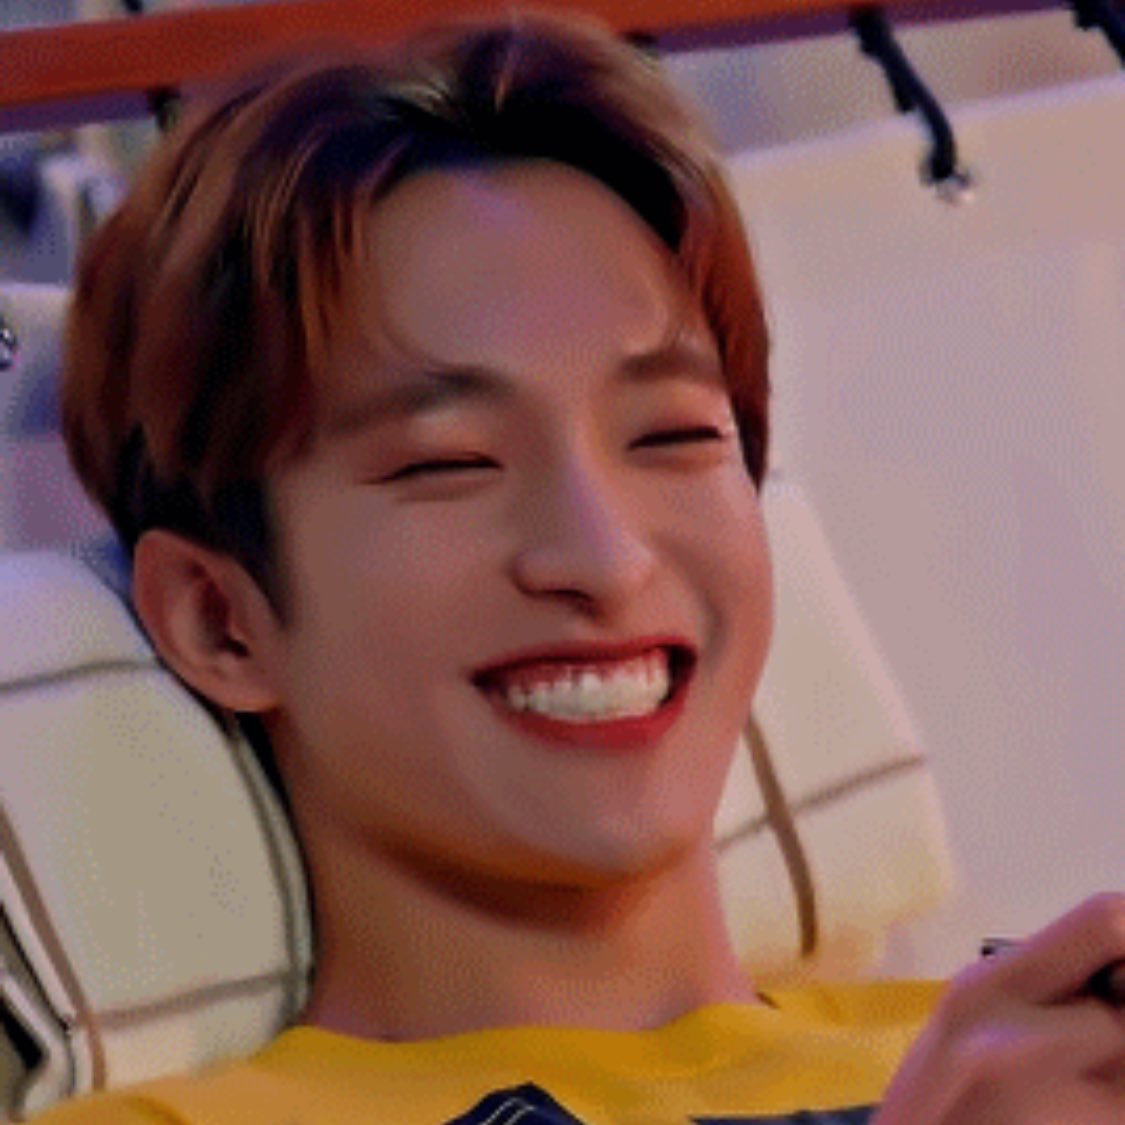 seokmin ; yellow— the colour of the sun, smileys and sunflowers. signifying youthfulness, hope, positivity, fulfilment, courage, self-confidence, wisdom and happiness.